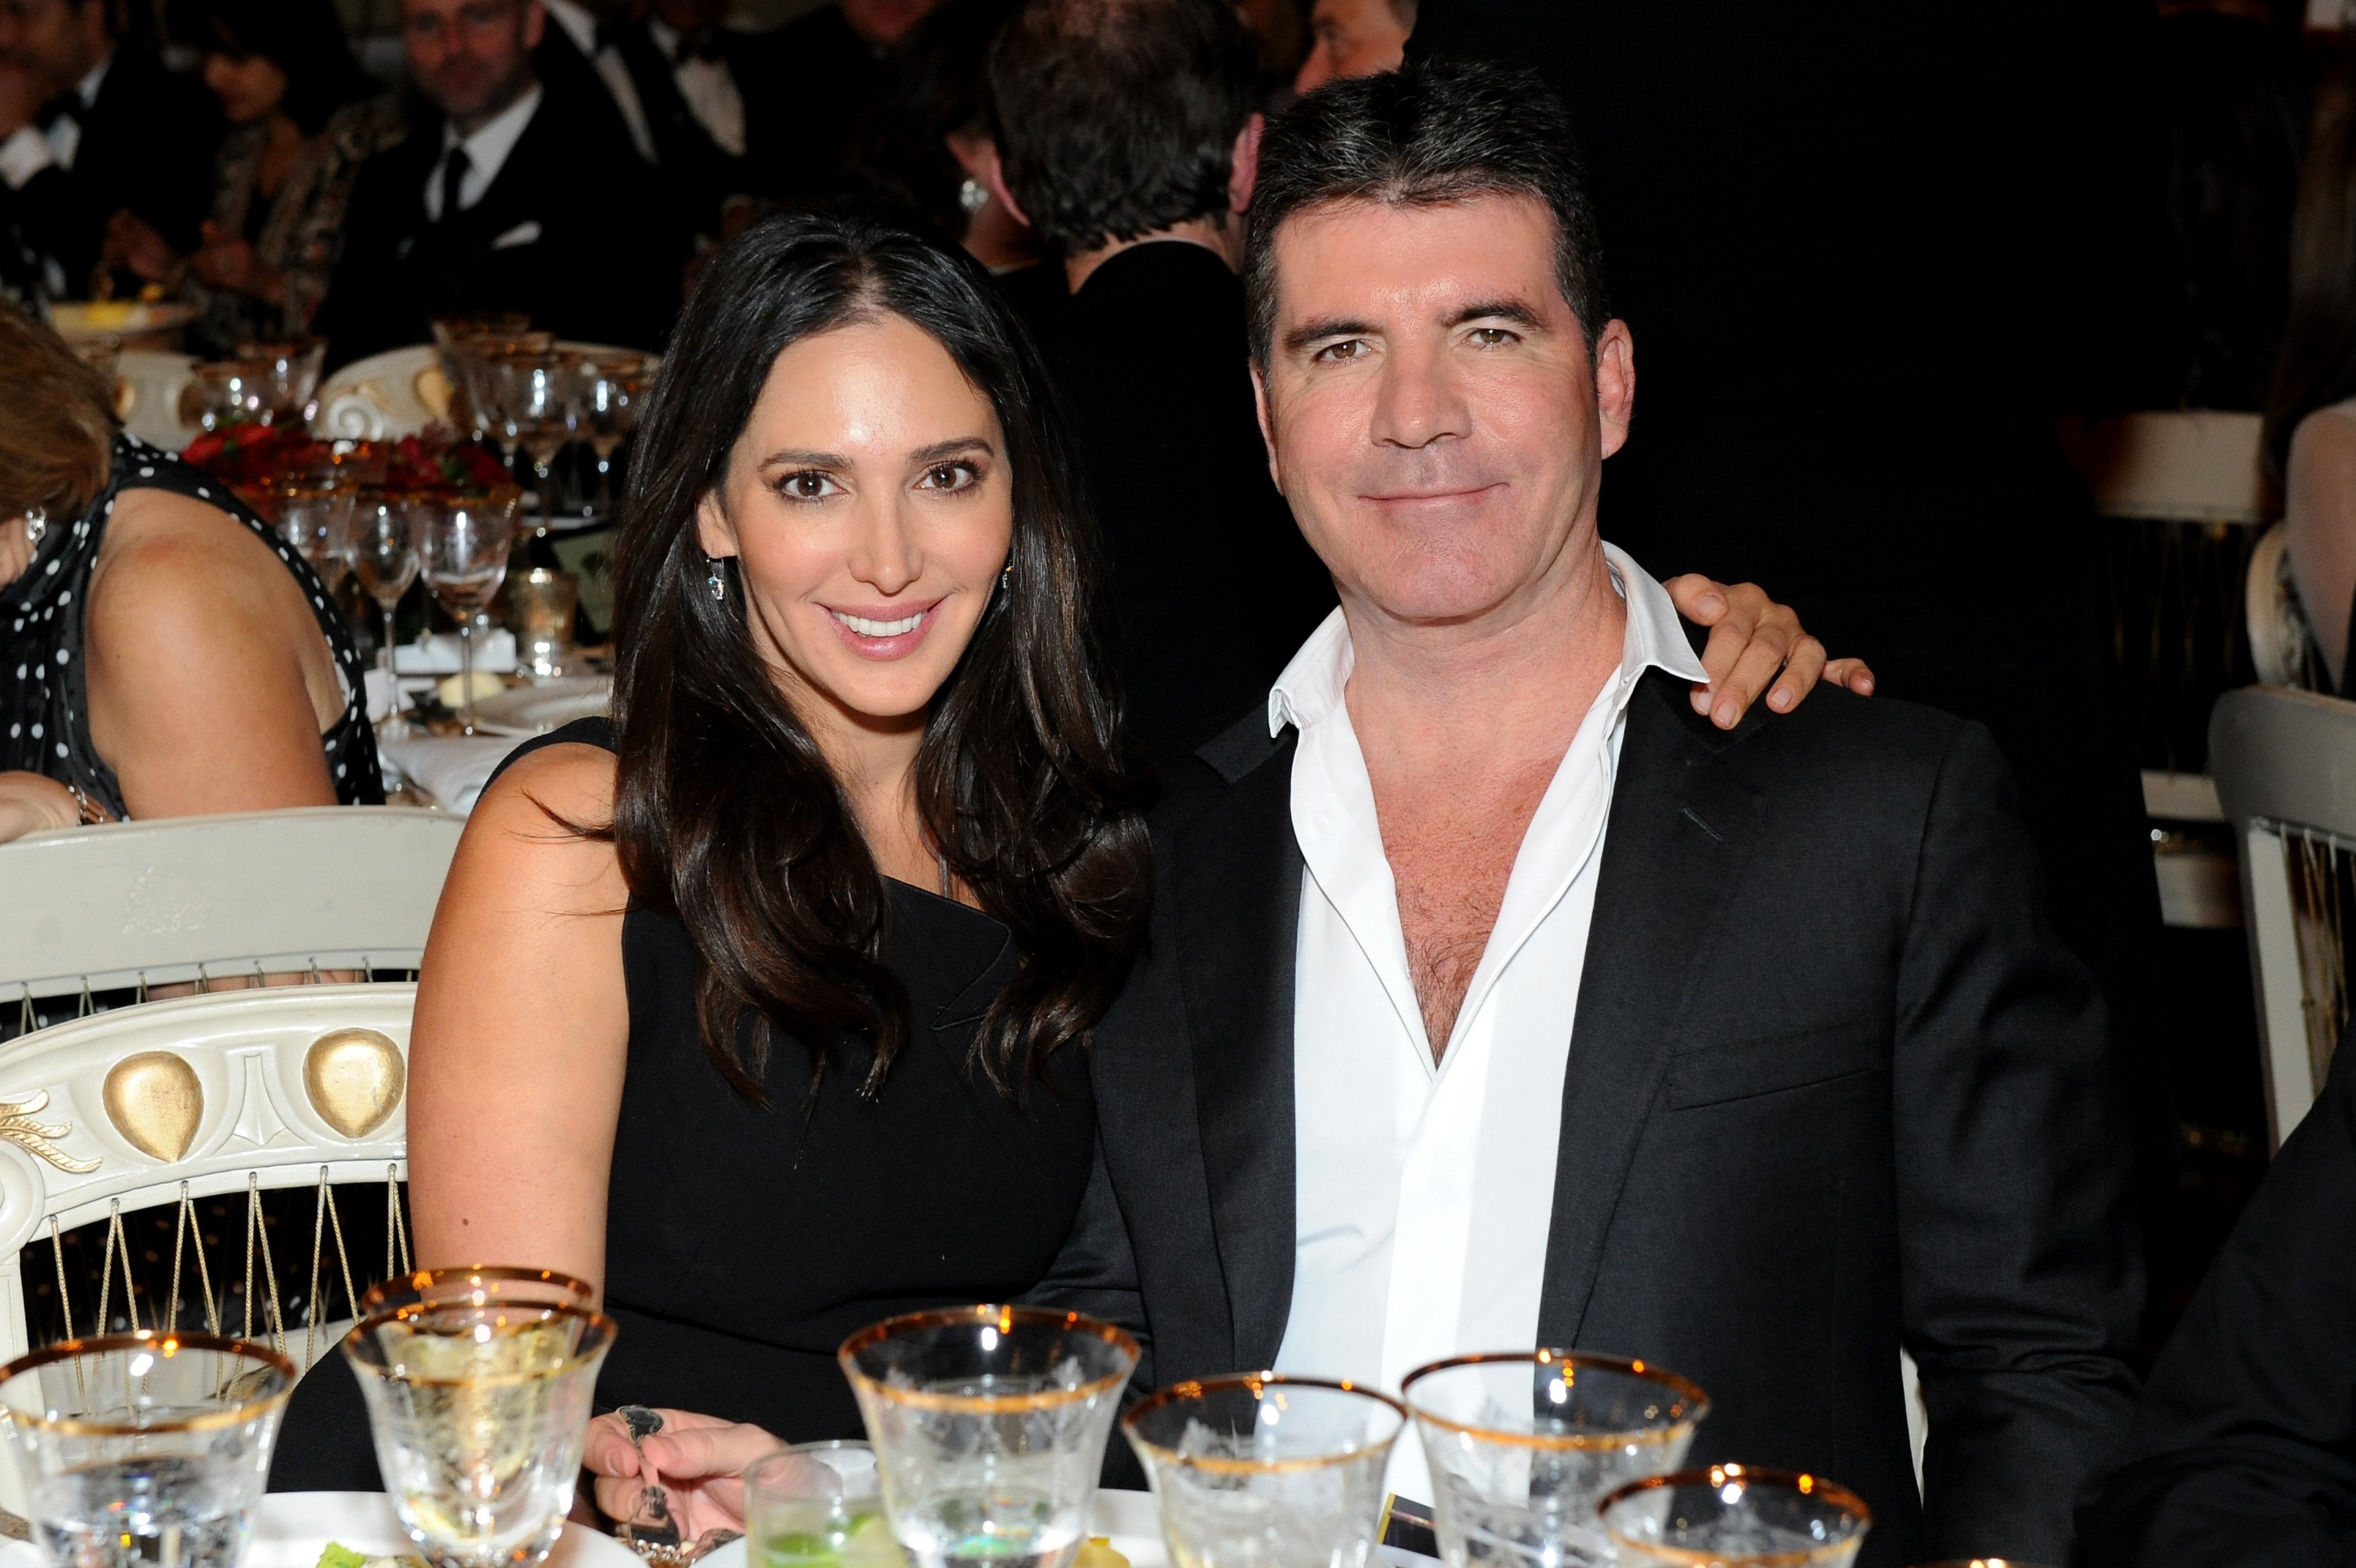 Simon Cowell and Lauren Silverman attend the British Asian Trust dinner at Banqueting House on February 3, 2015 in London, England | Source: Getty Images 